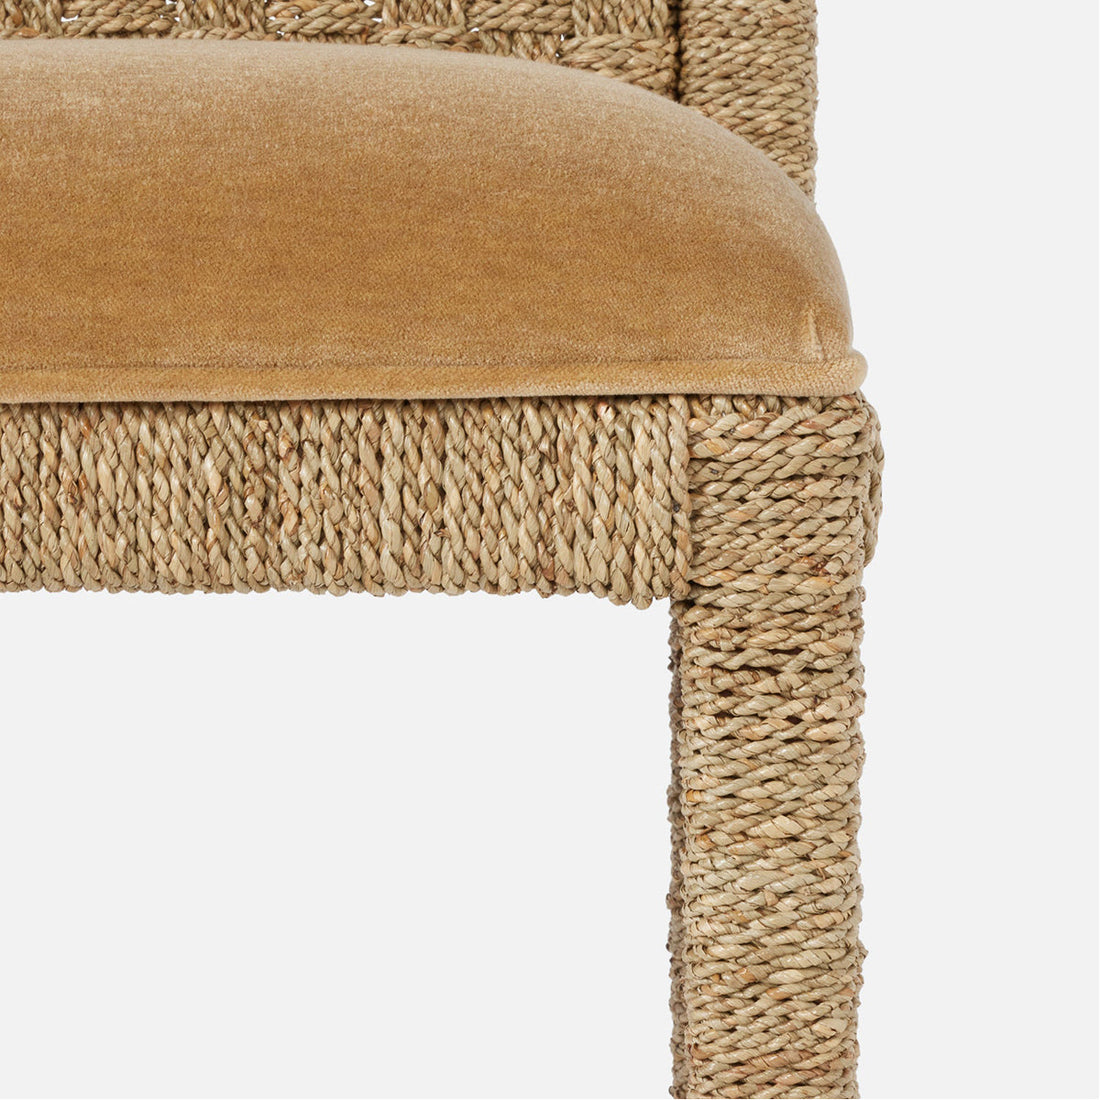 Made Goods Hayes Dining Chair in Humboldt Cotton Jute